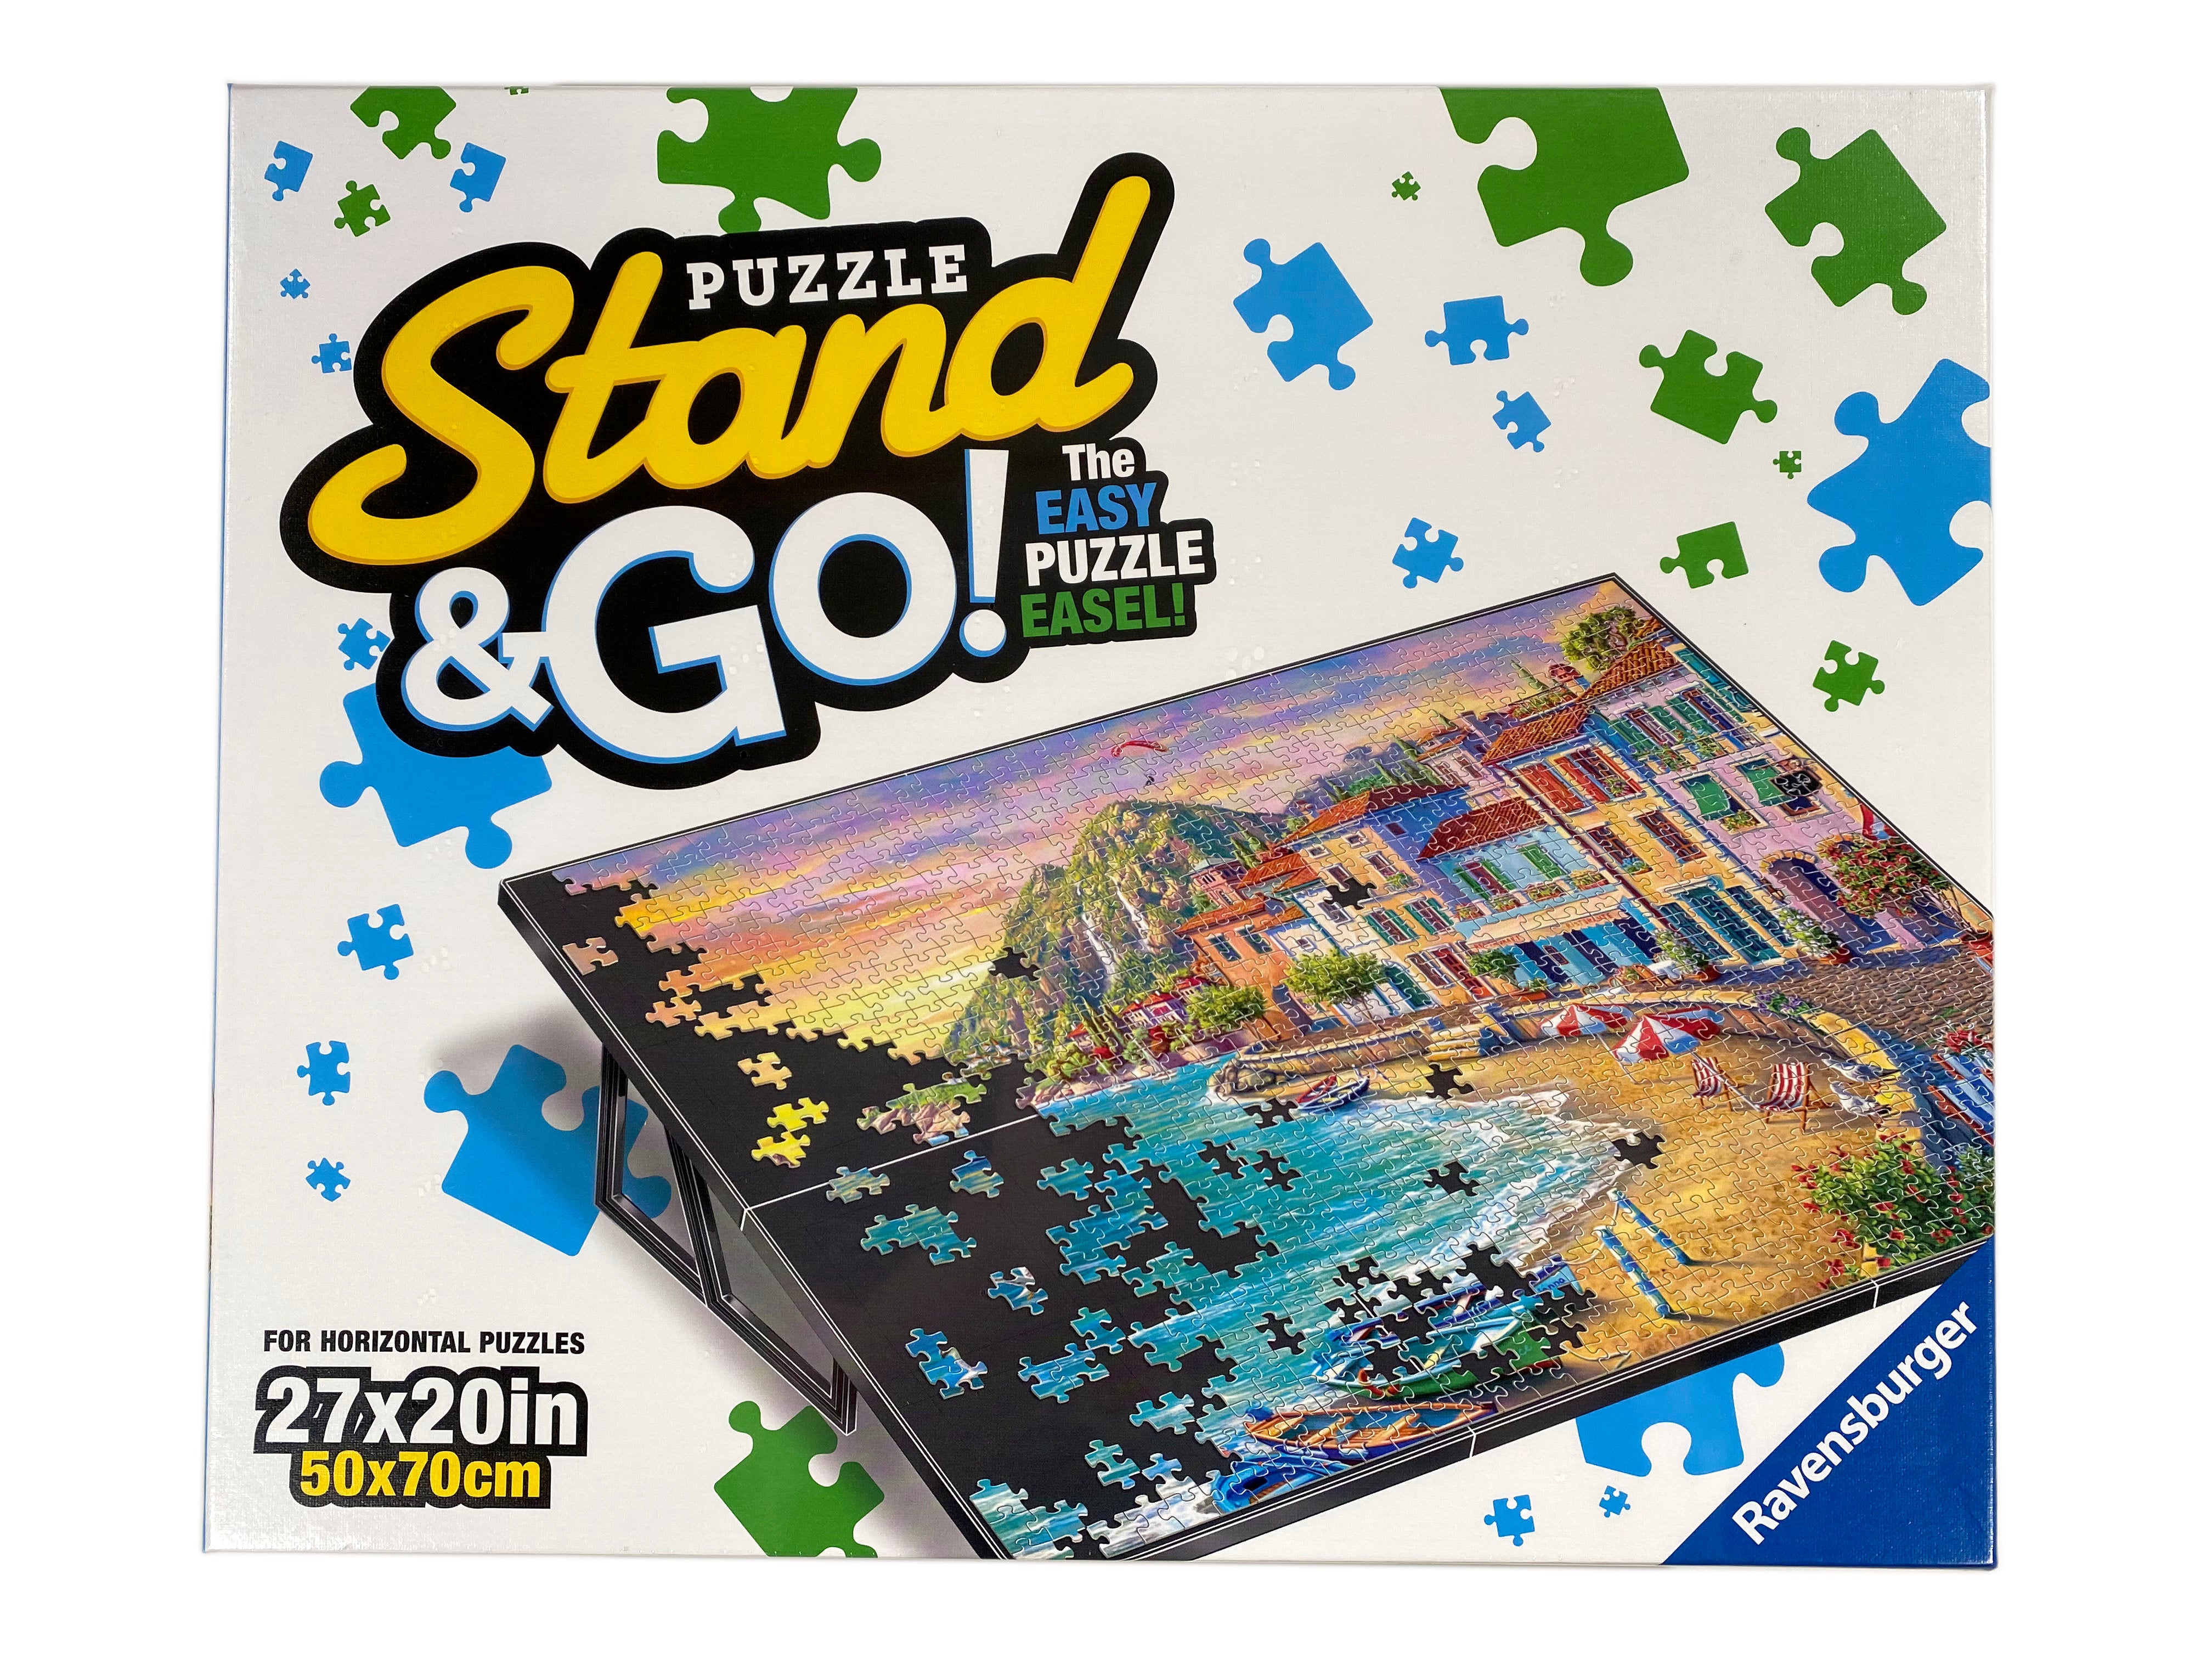 Puzzle Stand & Go - The Easy Puzzle Easel — Bird in Hand